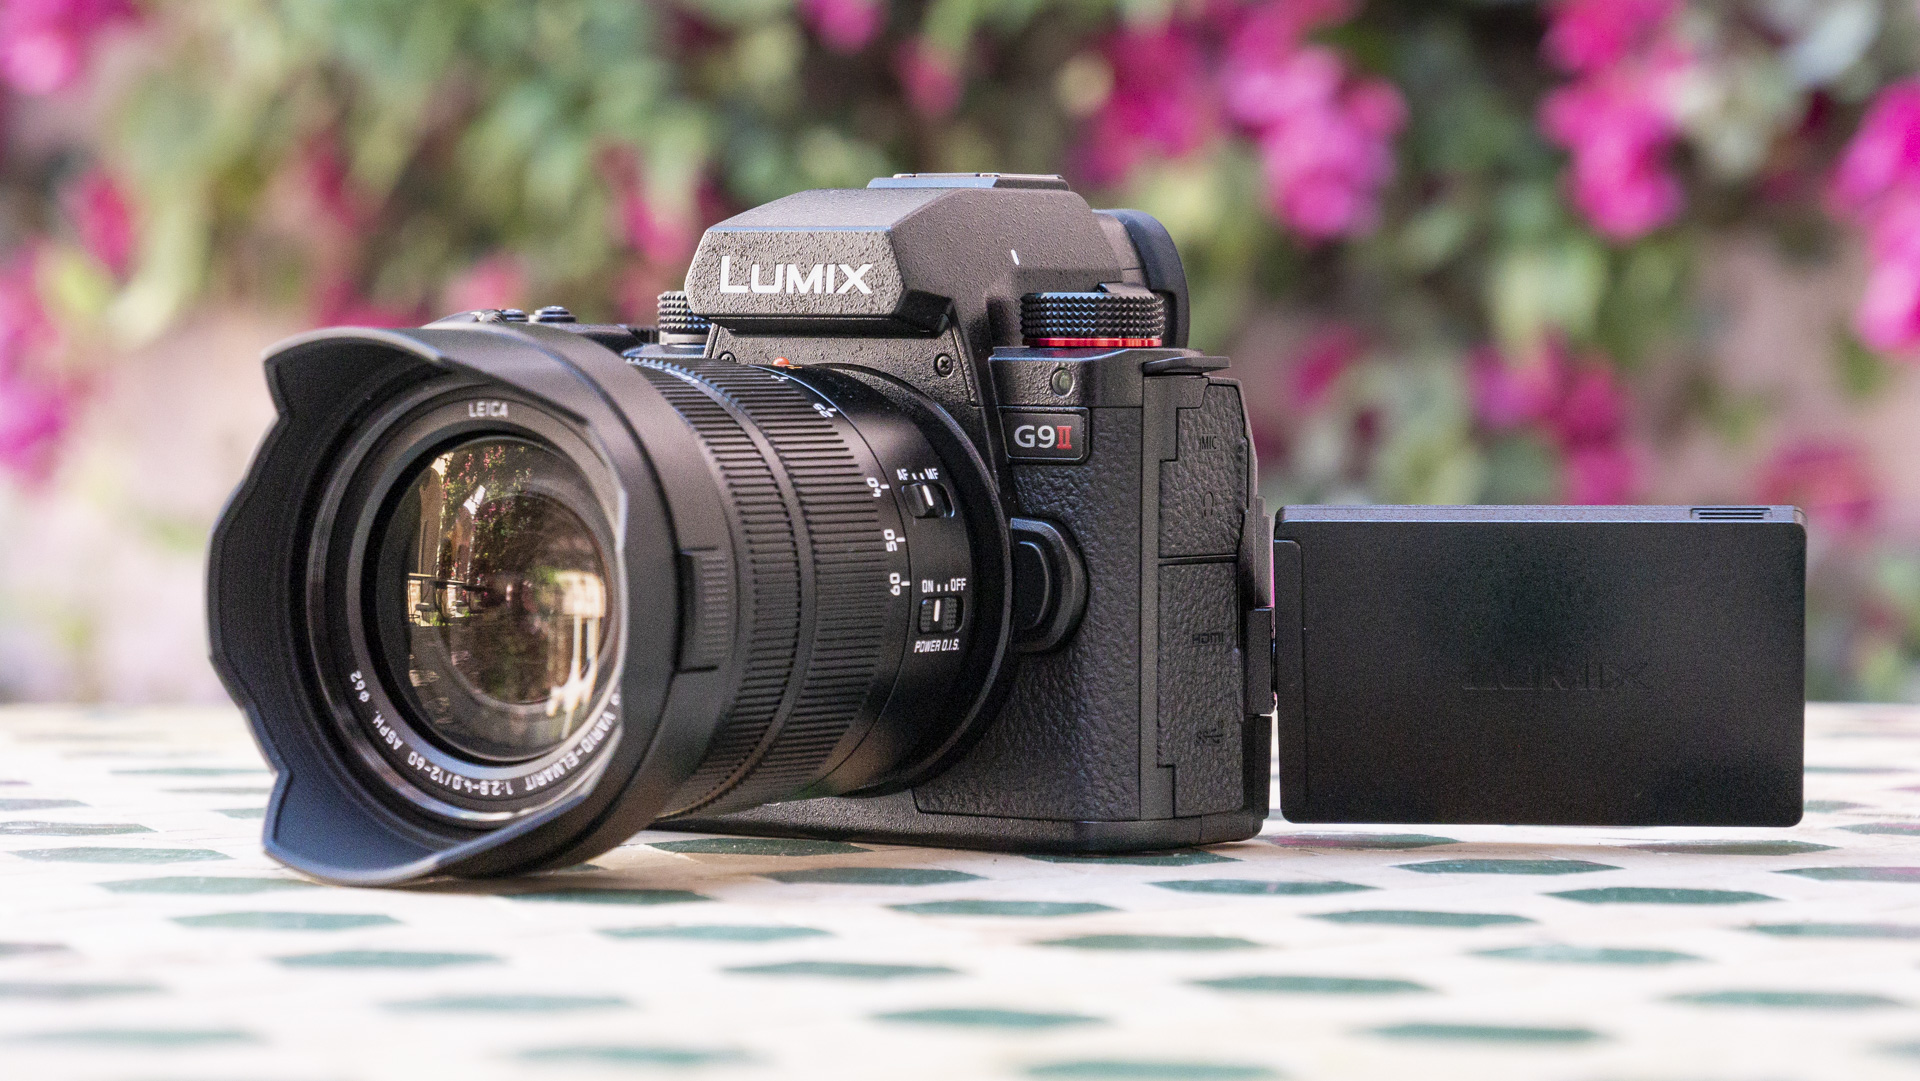 Panasonic Lumix G9 II camera on a patterned table with pink flower background